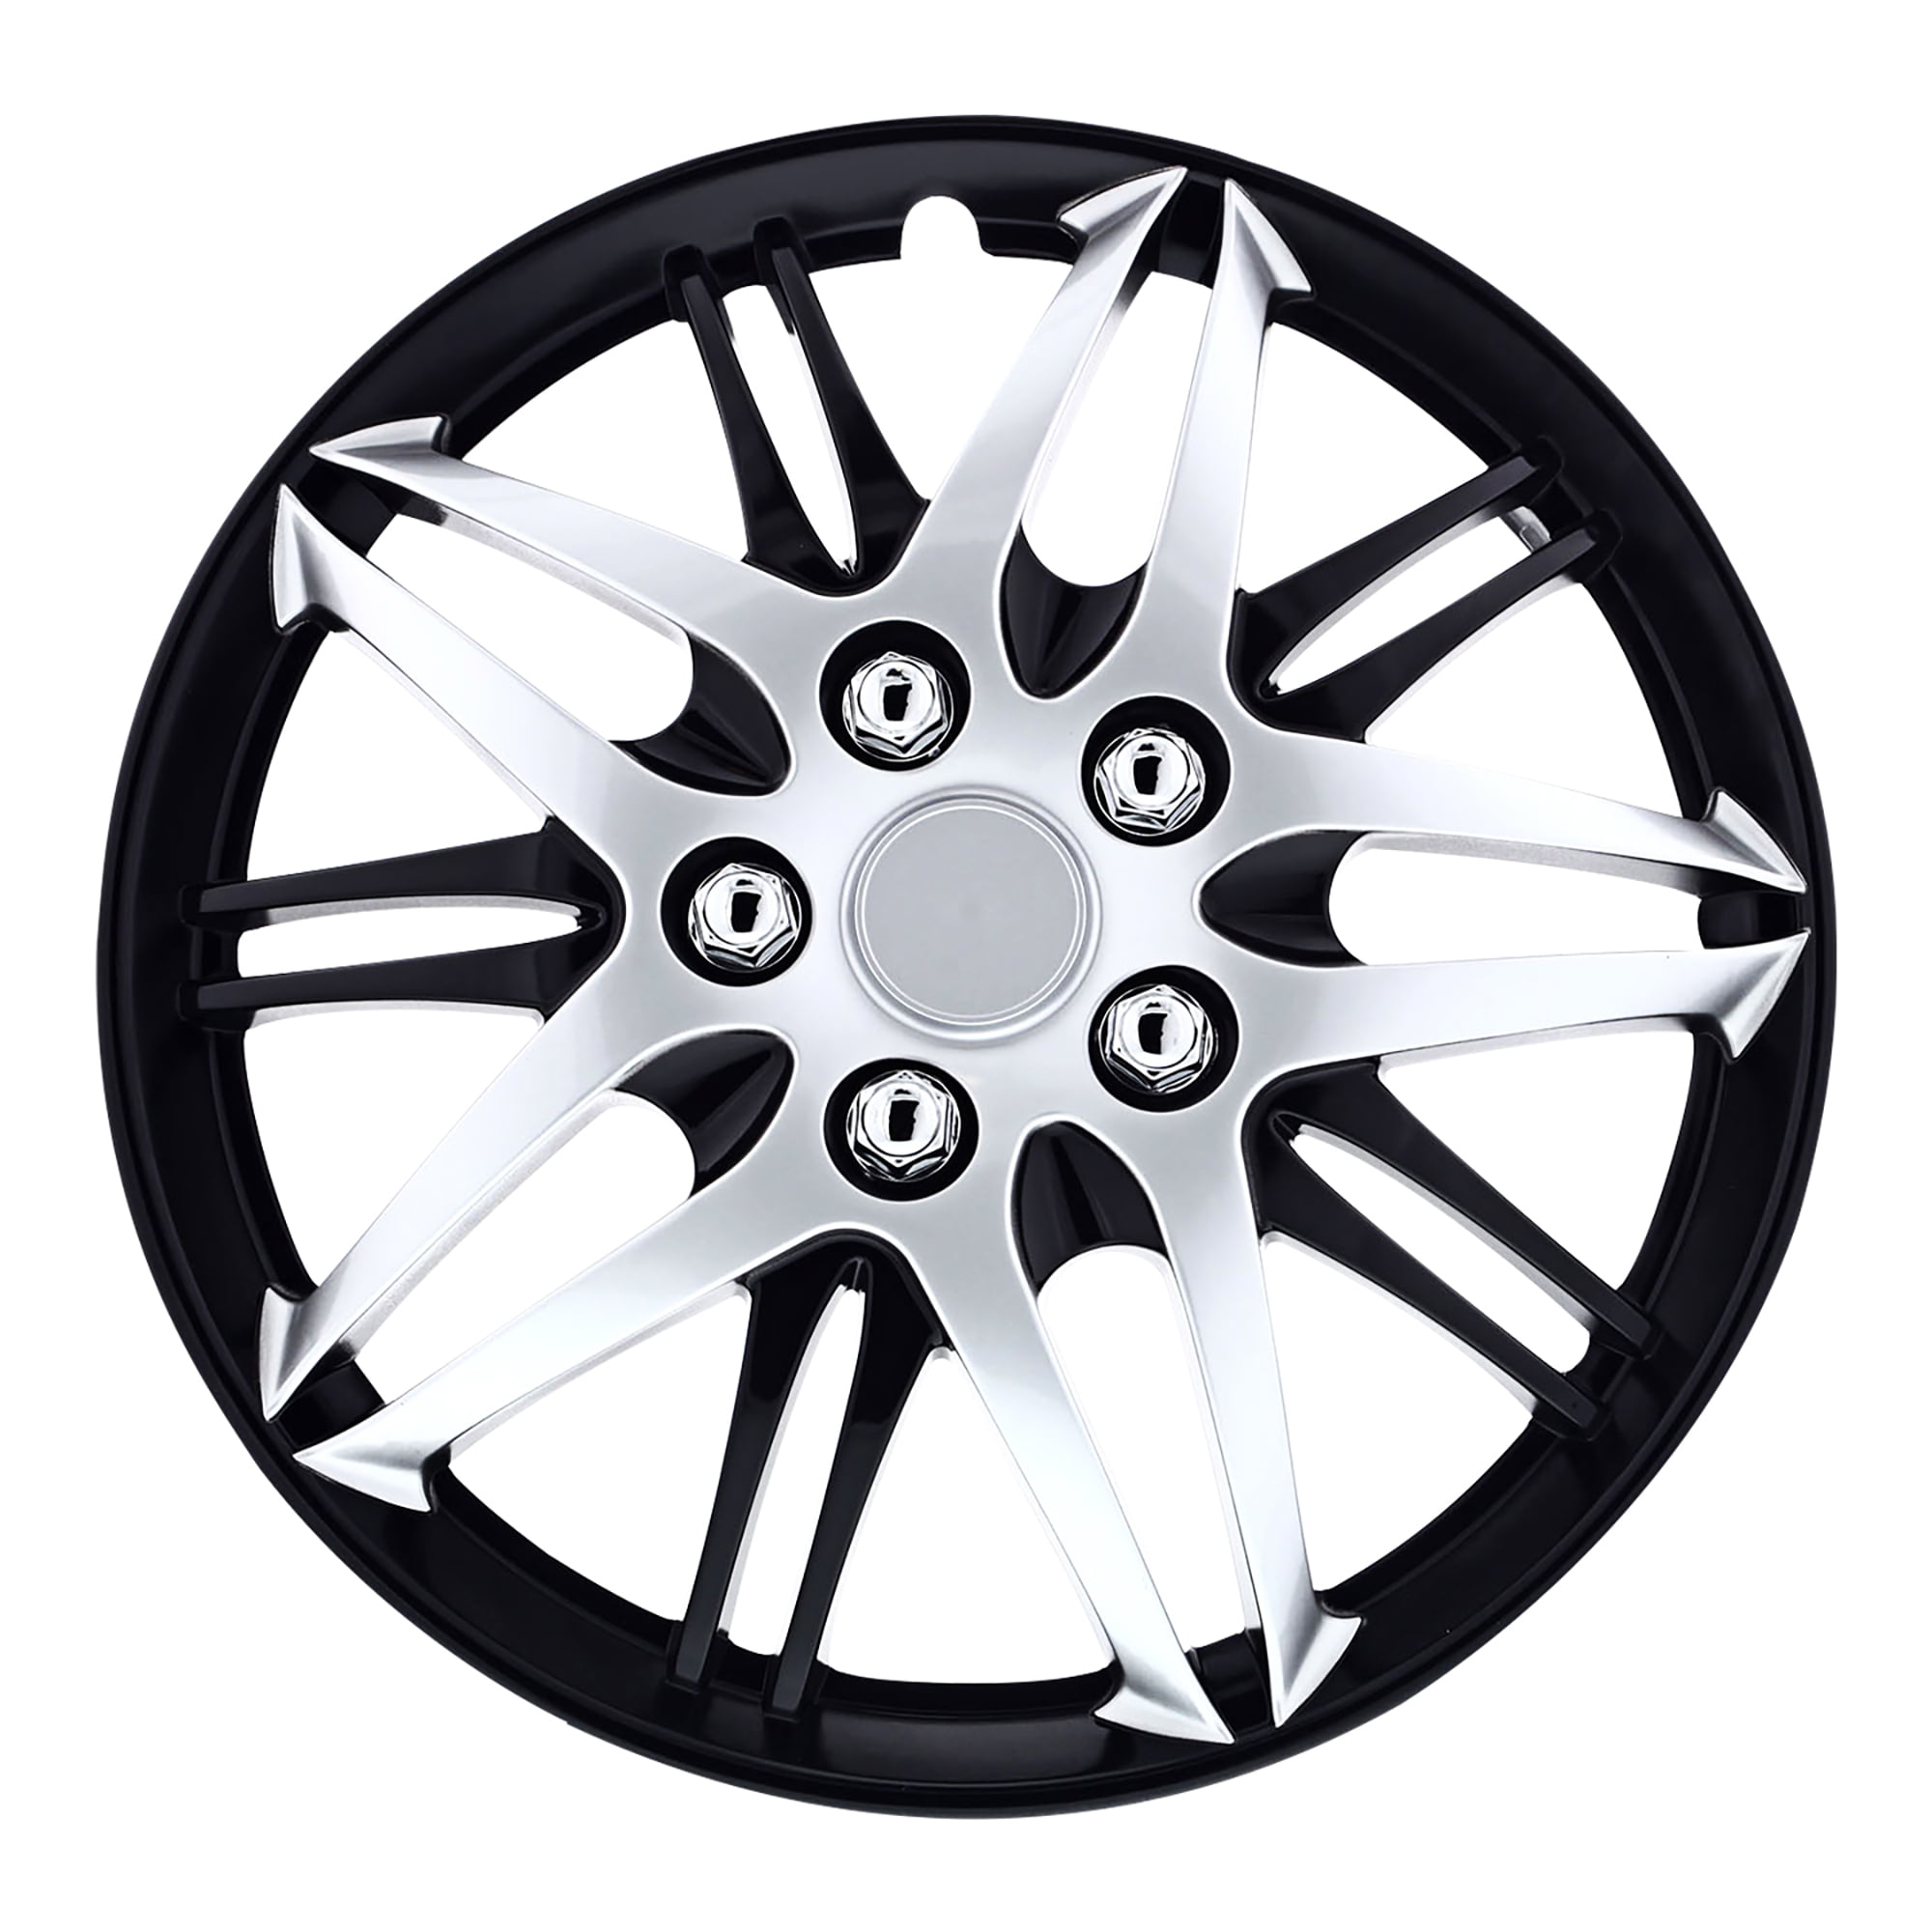 Pilot WH54415CBLK Universal Fit Formula Series Black and Chrome 15 Inch Wheel Covers Set of